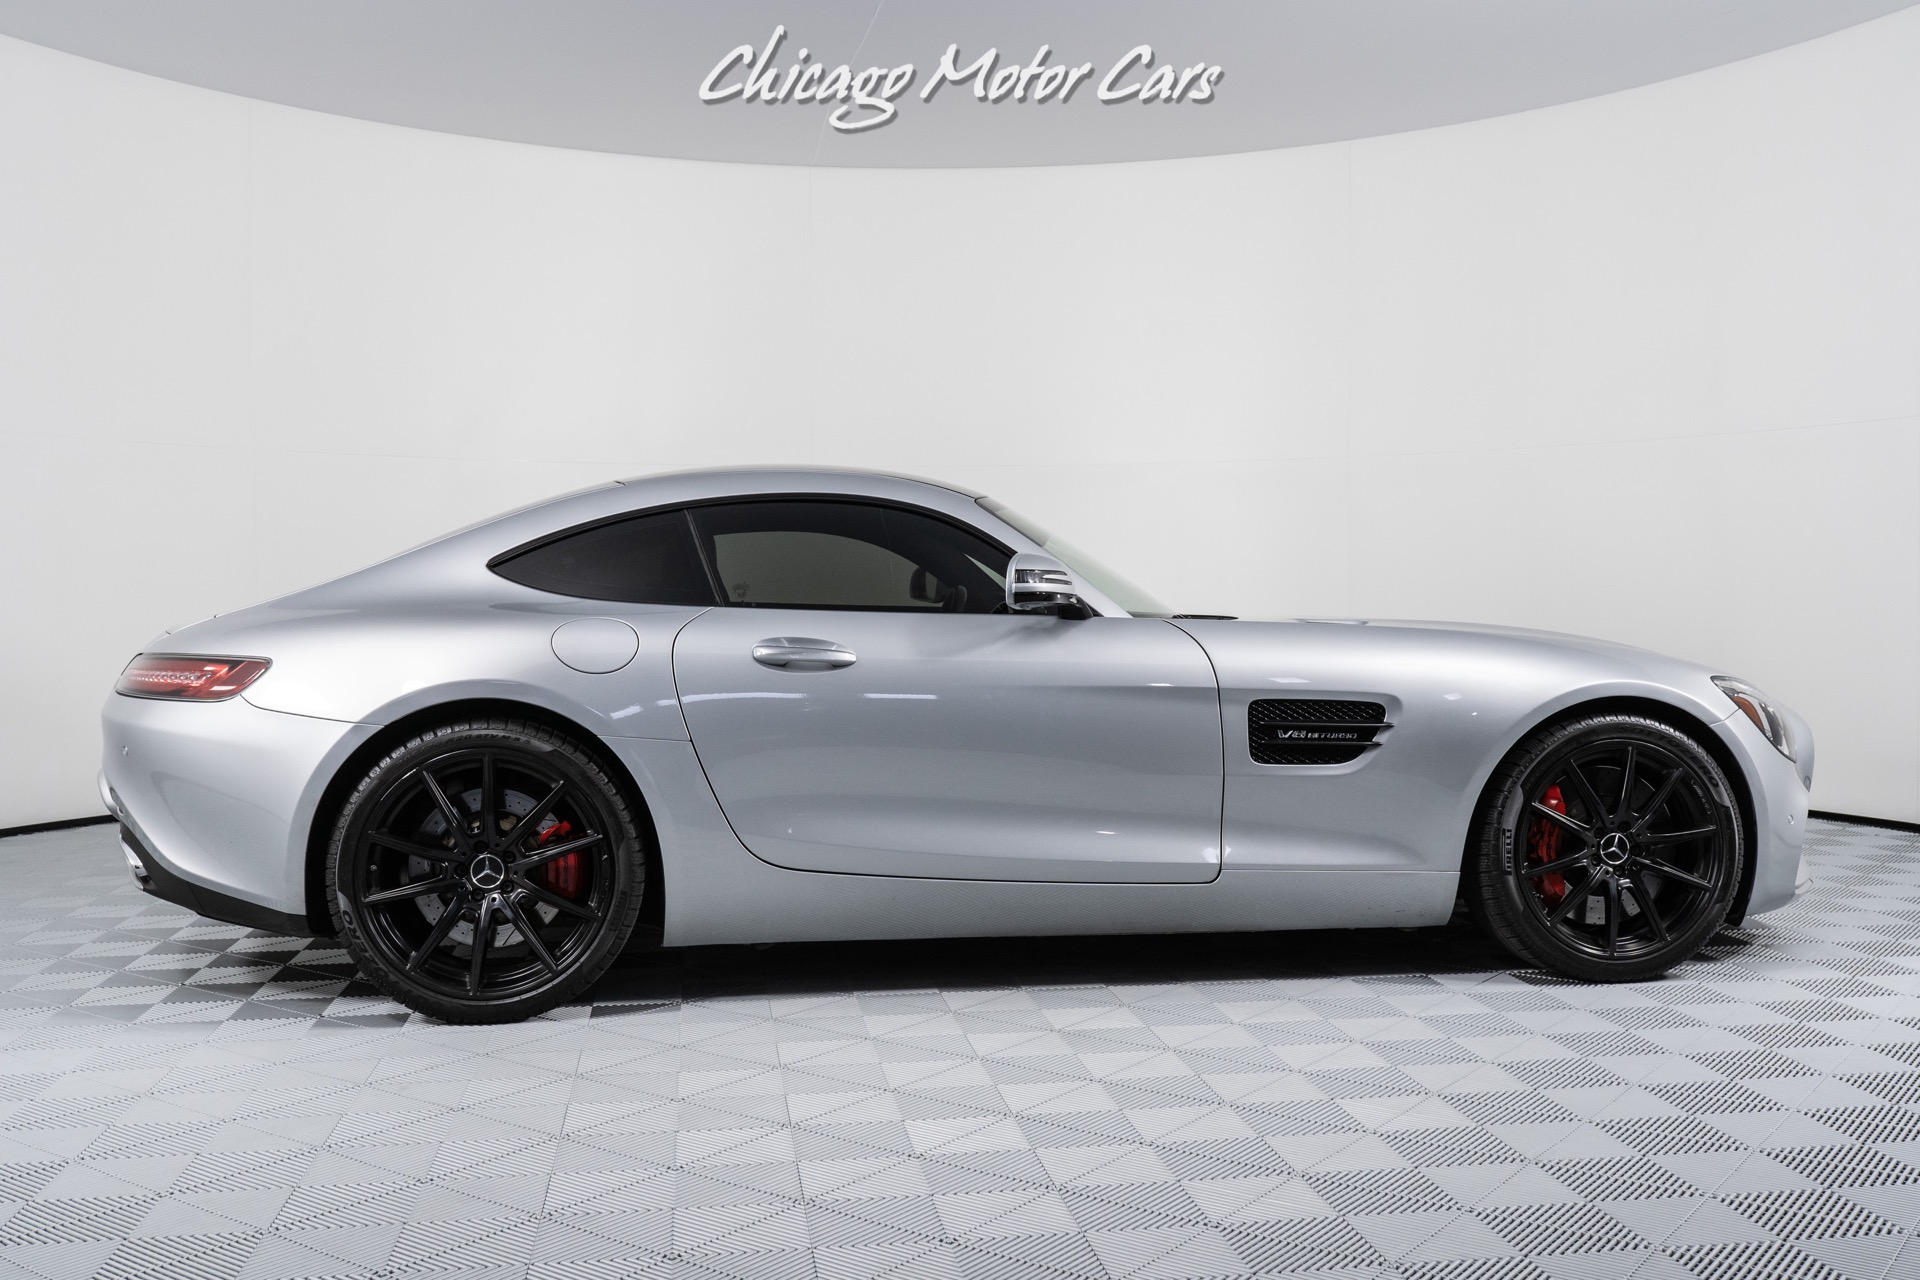 Used-2016-Mercedes-Benz-AMG-GTS-CARBON-FIBER-INTERIOR-TRIM-PANORAMIC-ROOF-LOADED